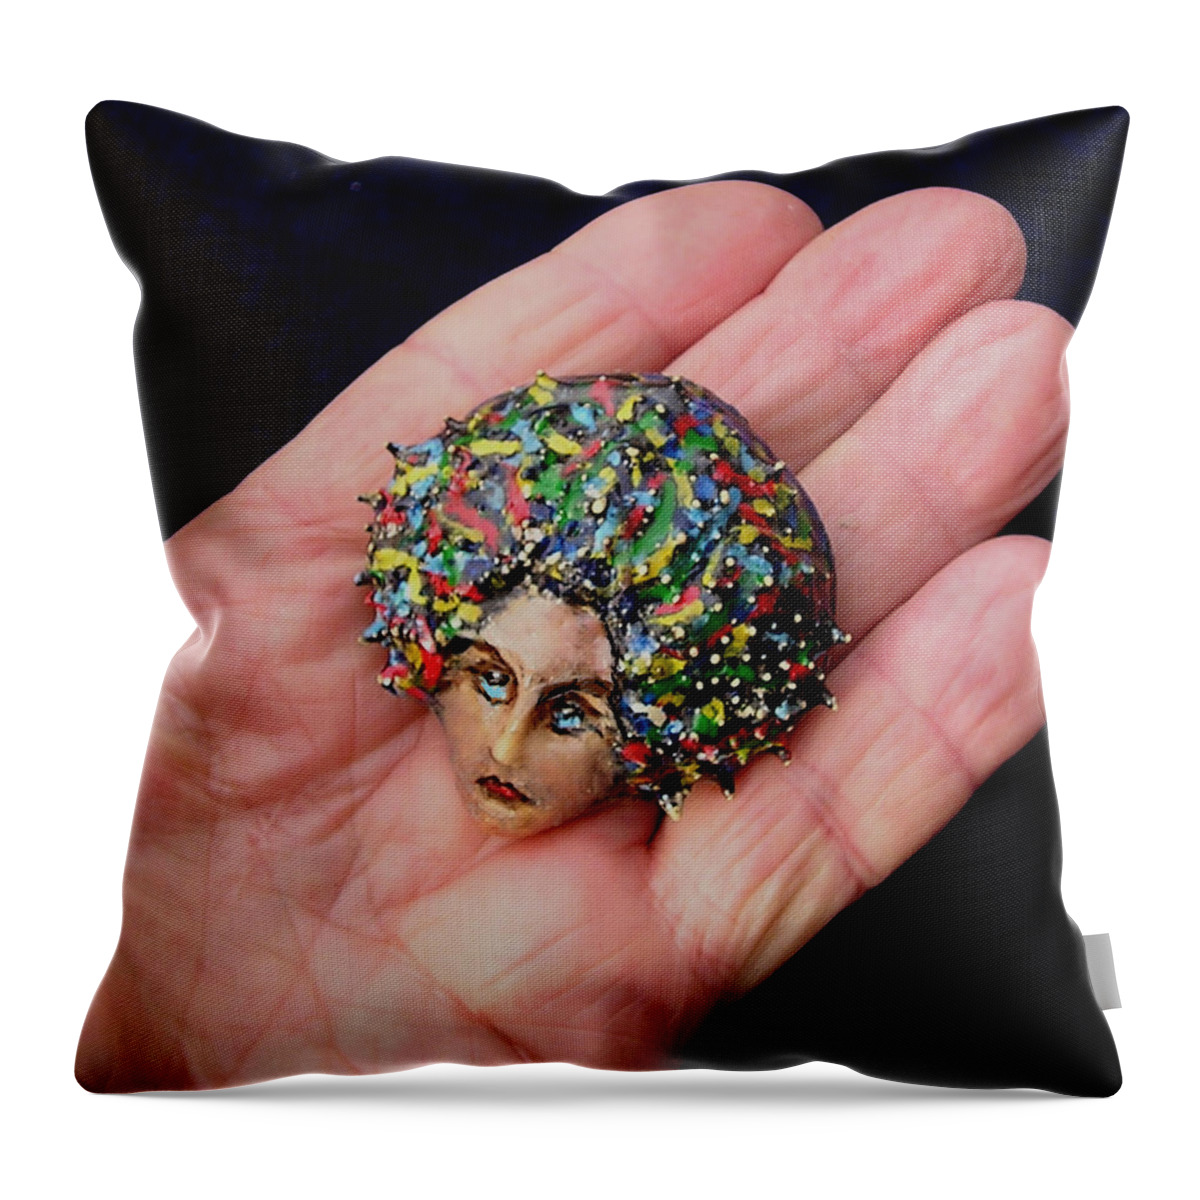 Cameo Throw Pillow featuring the sculpture Medusa Cameo I by Roger Swezey